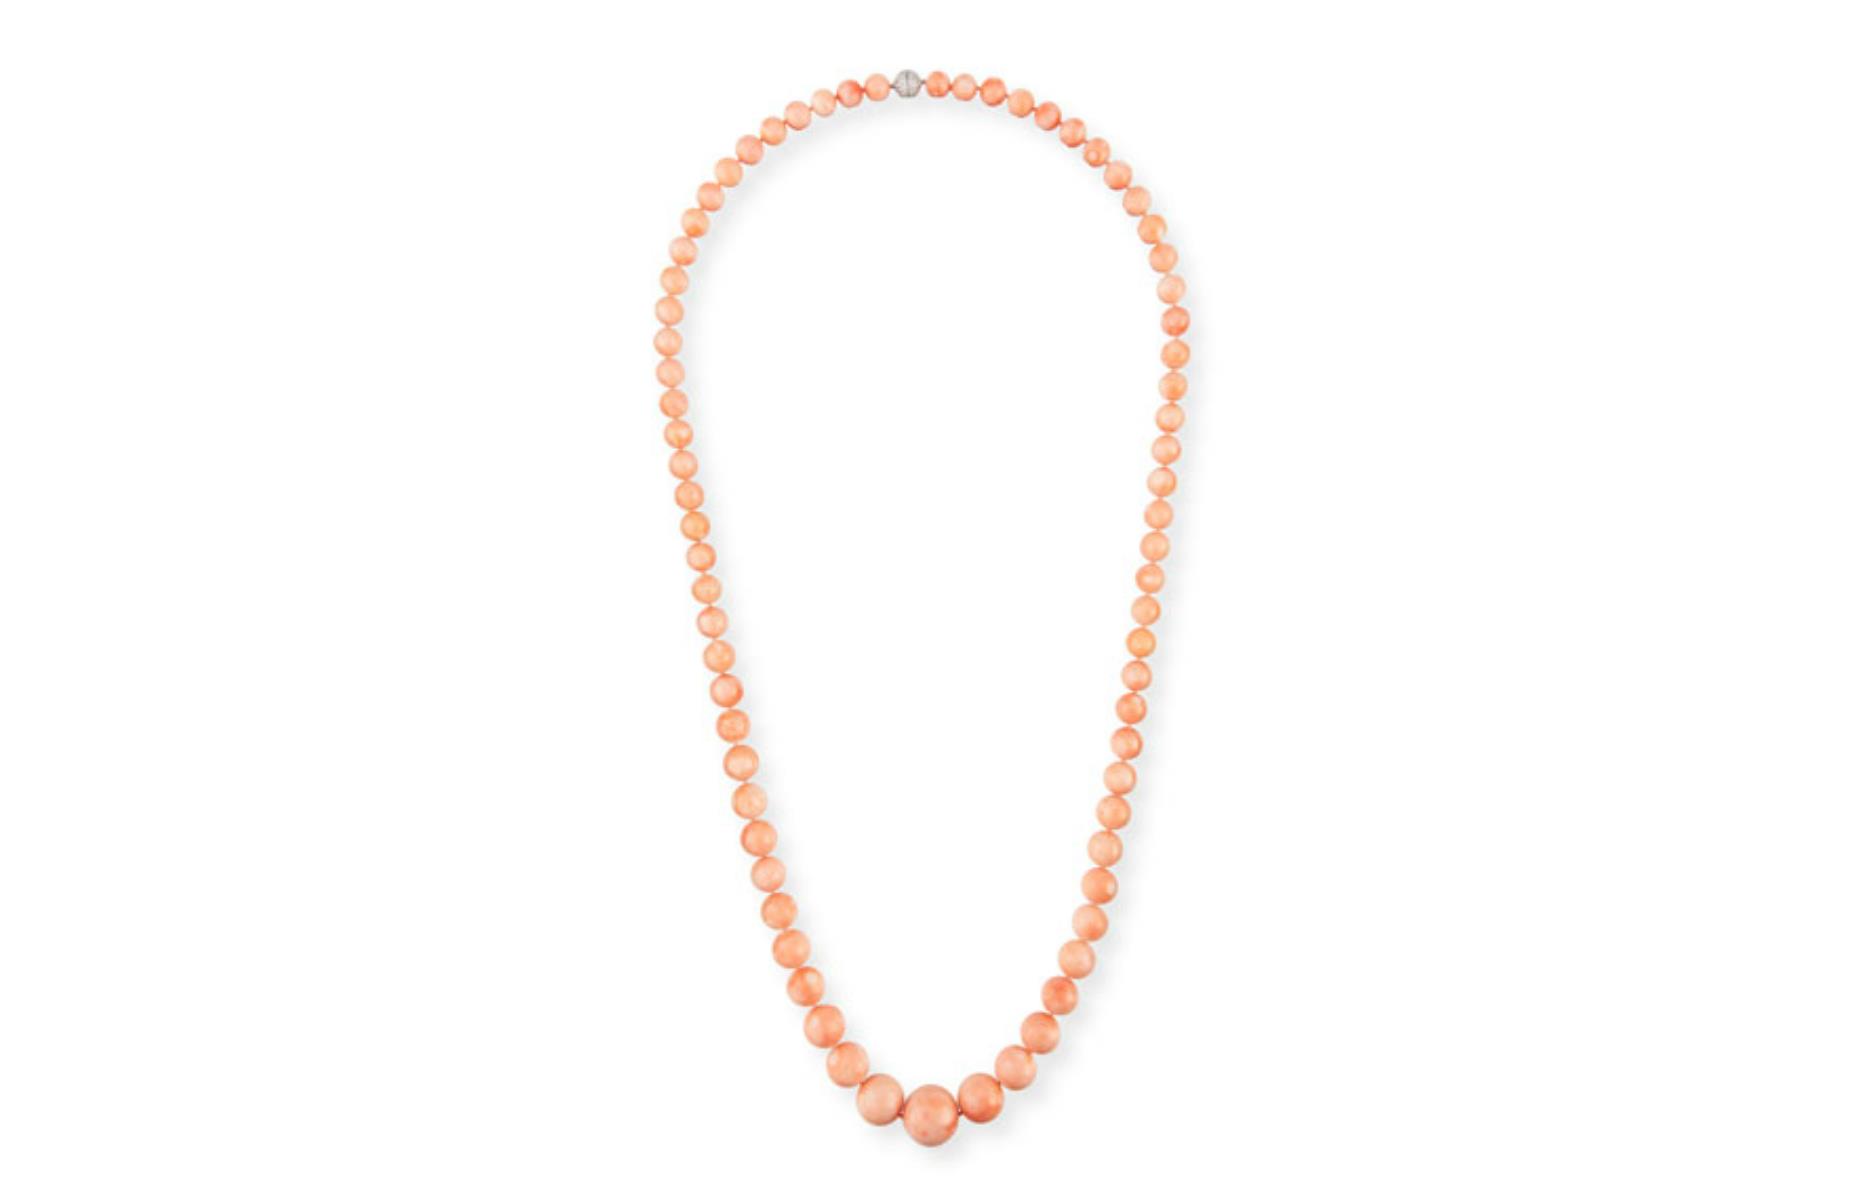 Coral bead necklace: $885,766 (£675.2k)